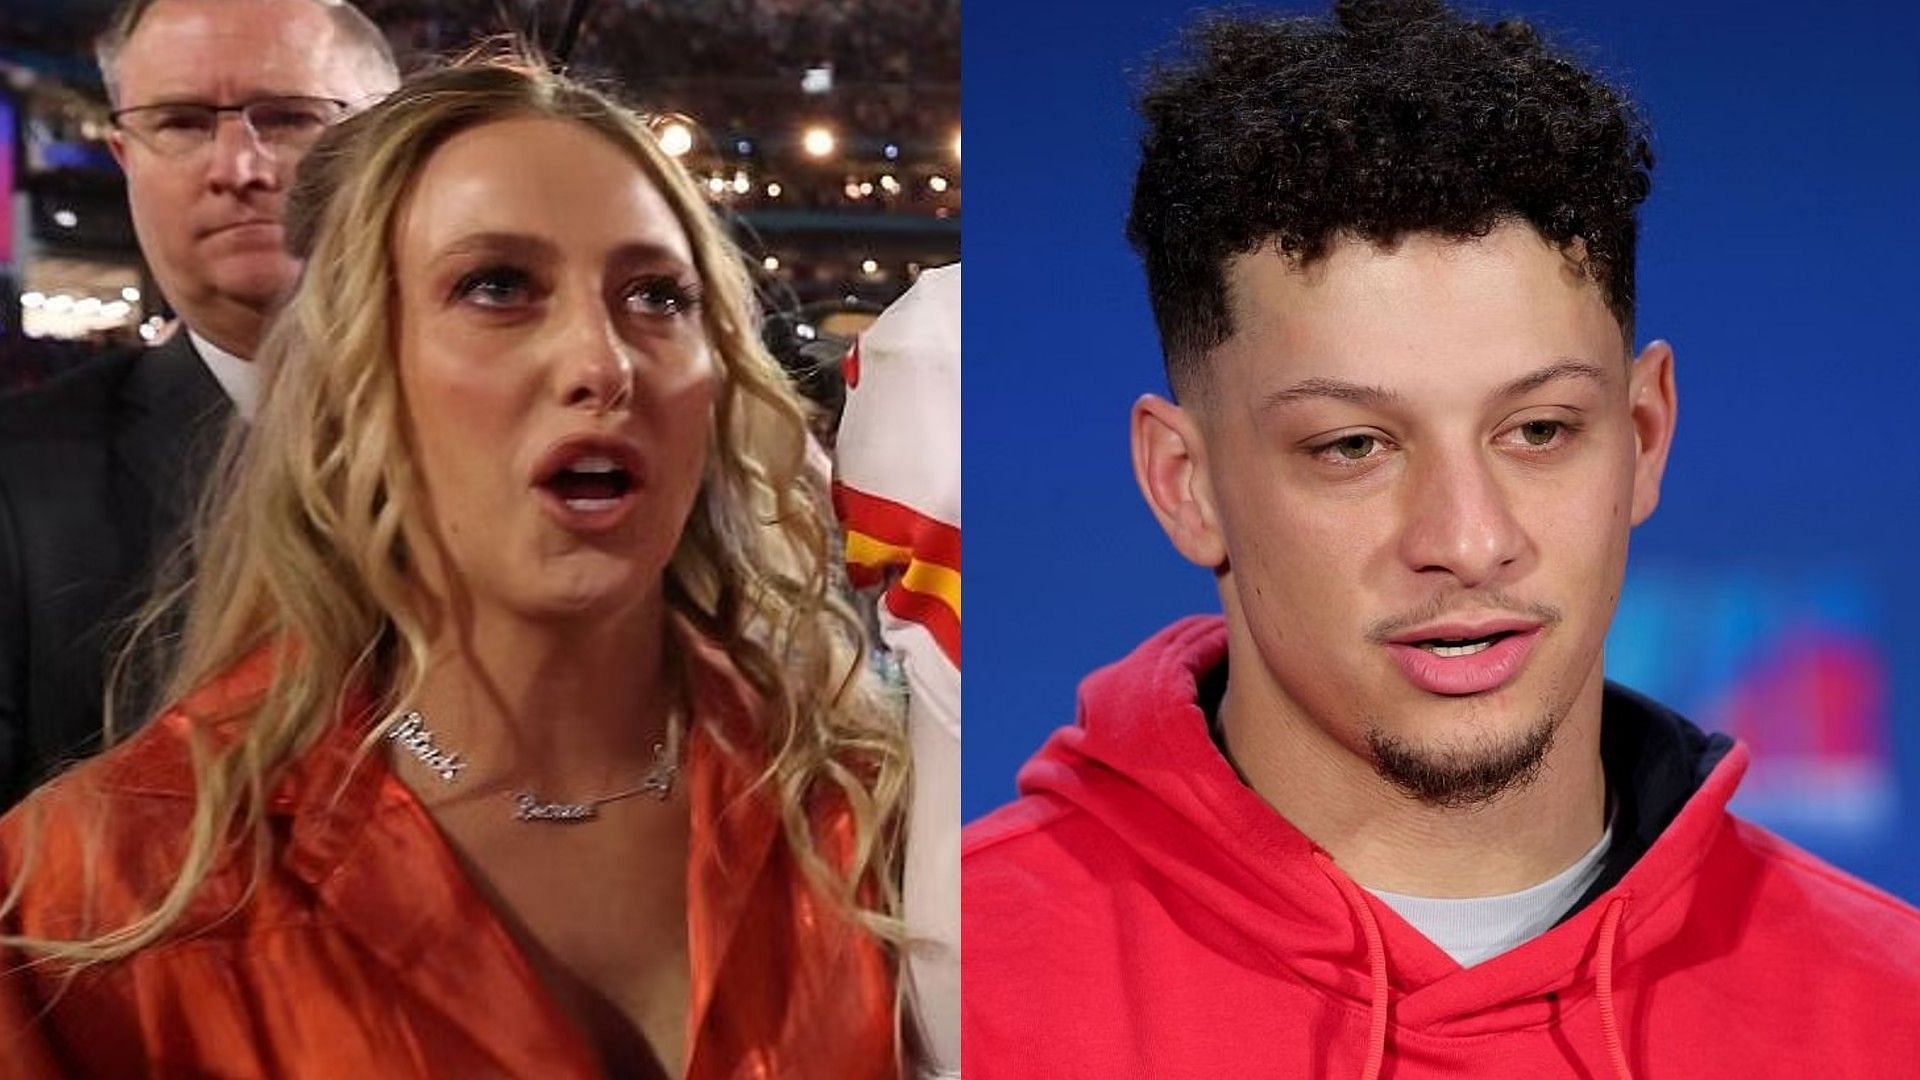 Brittany Mahomes was unhappy with expected chore workload when Patrick Mahomes was hurt in 2022 playoffs